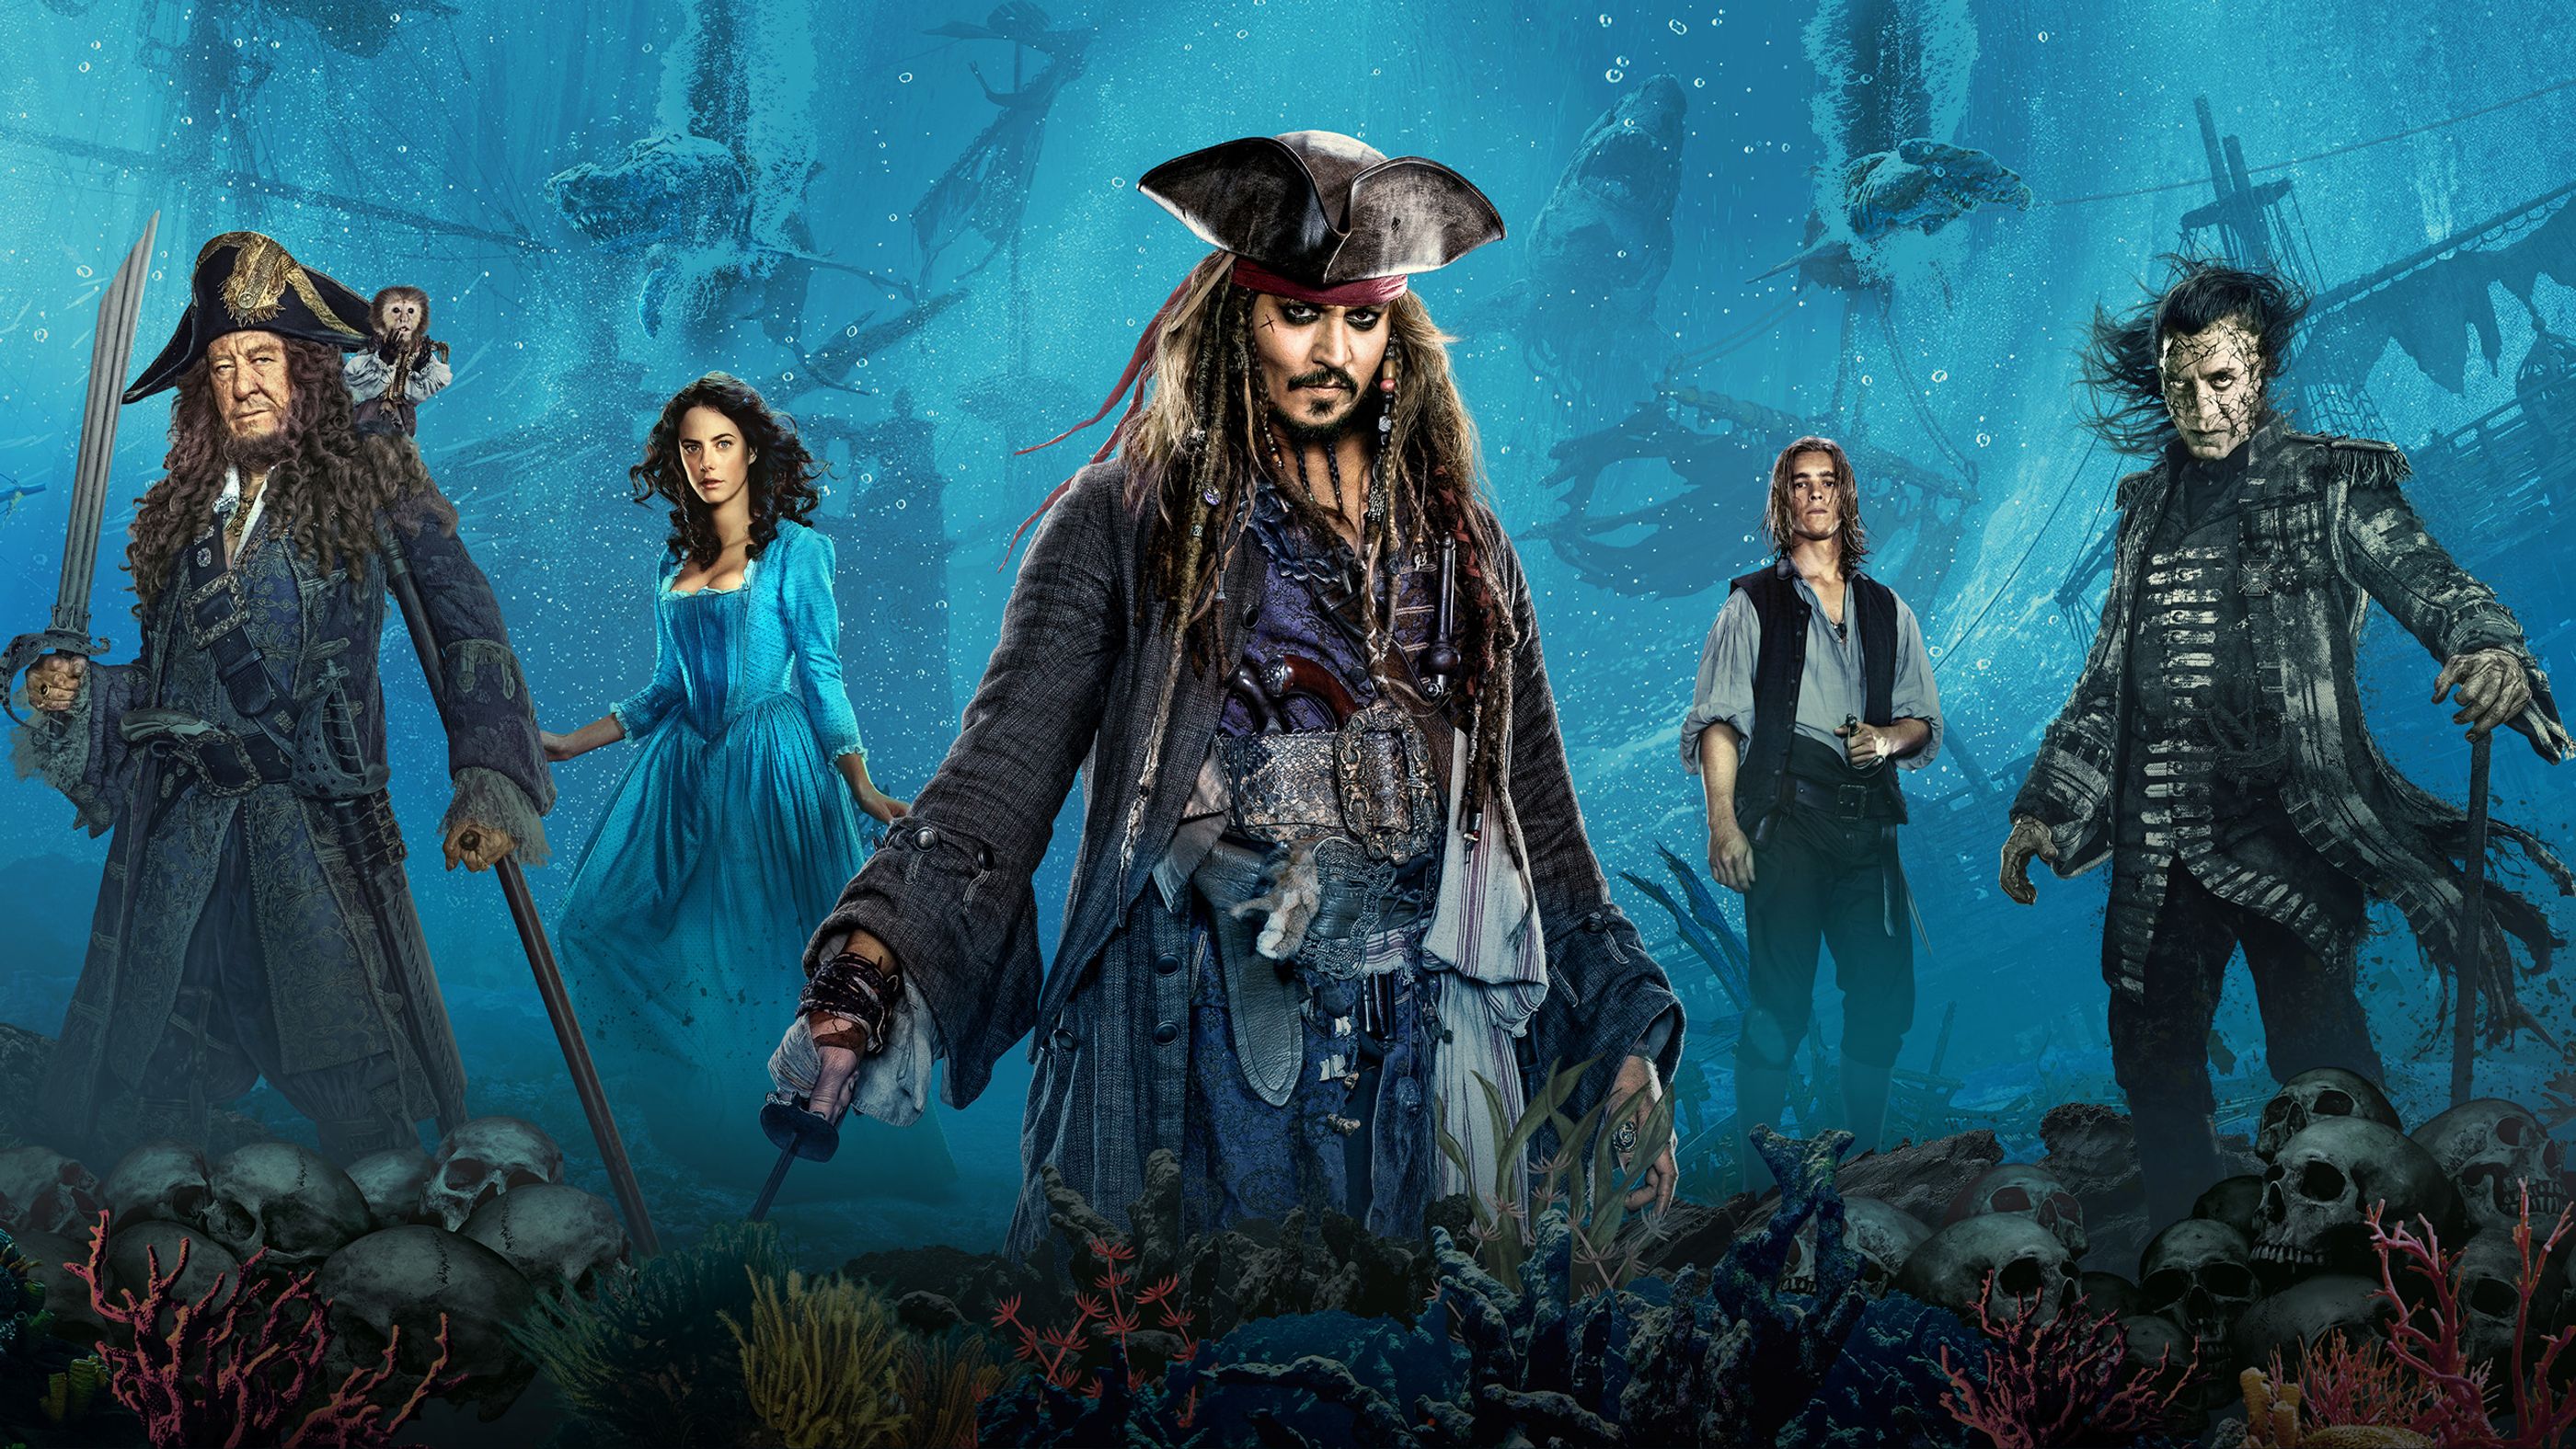 Young Jack Sparrow, Pirates of the Caribbean Dead Men Tell No Tales (2017)